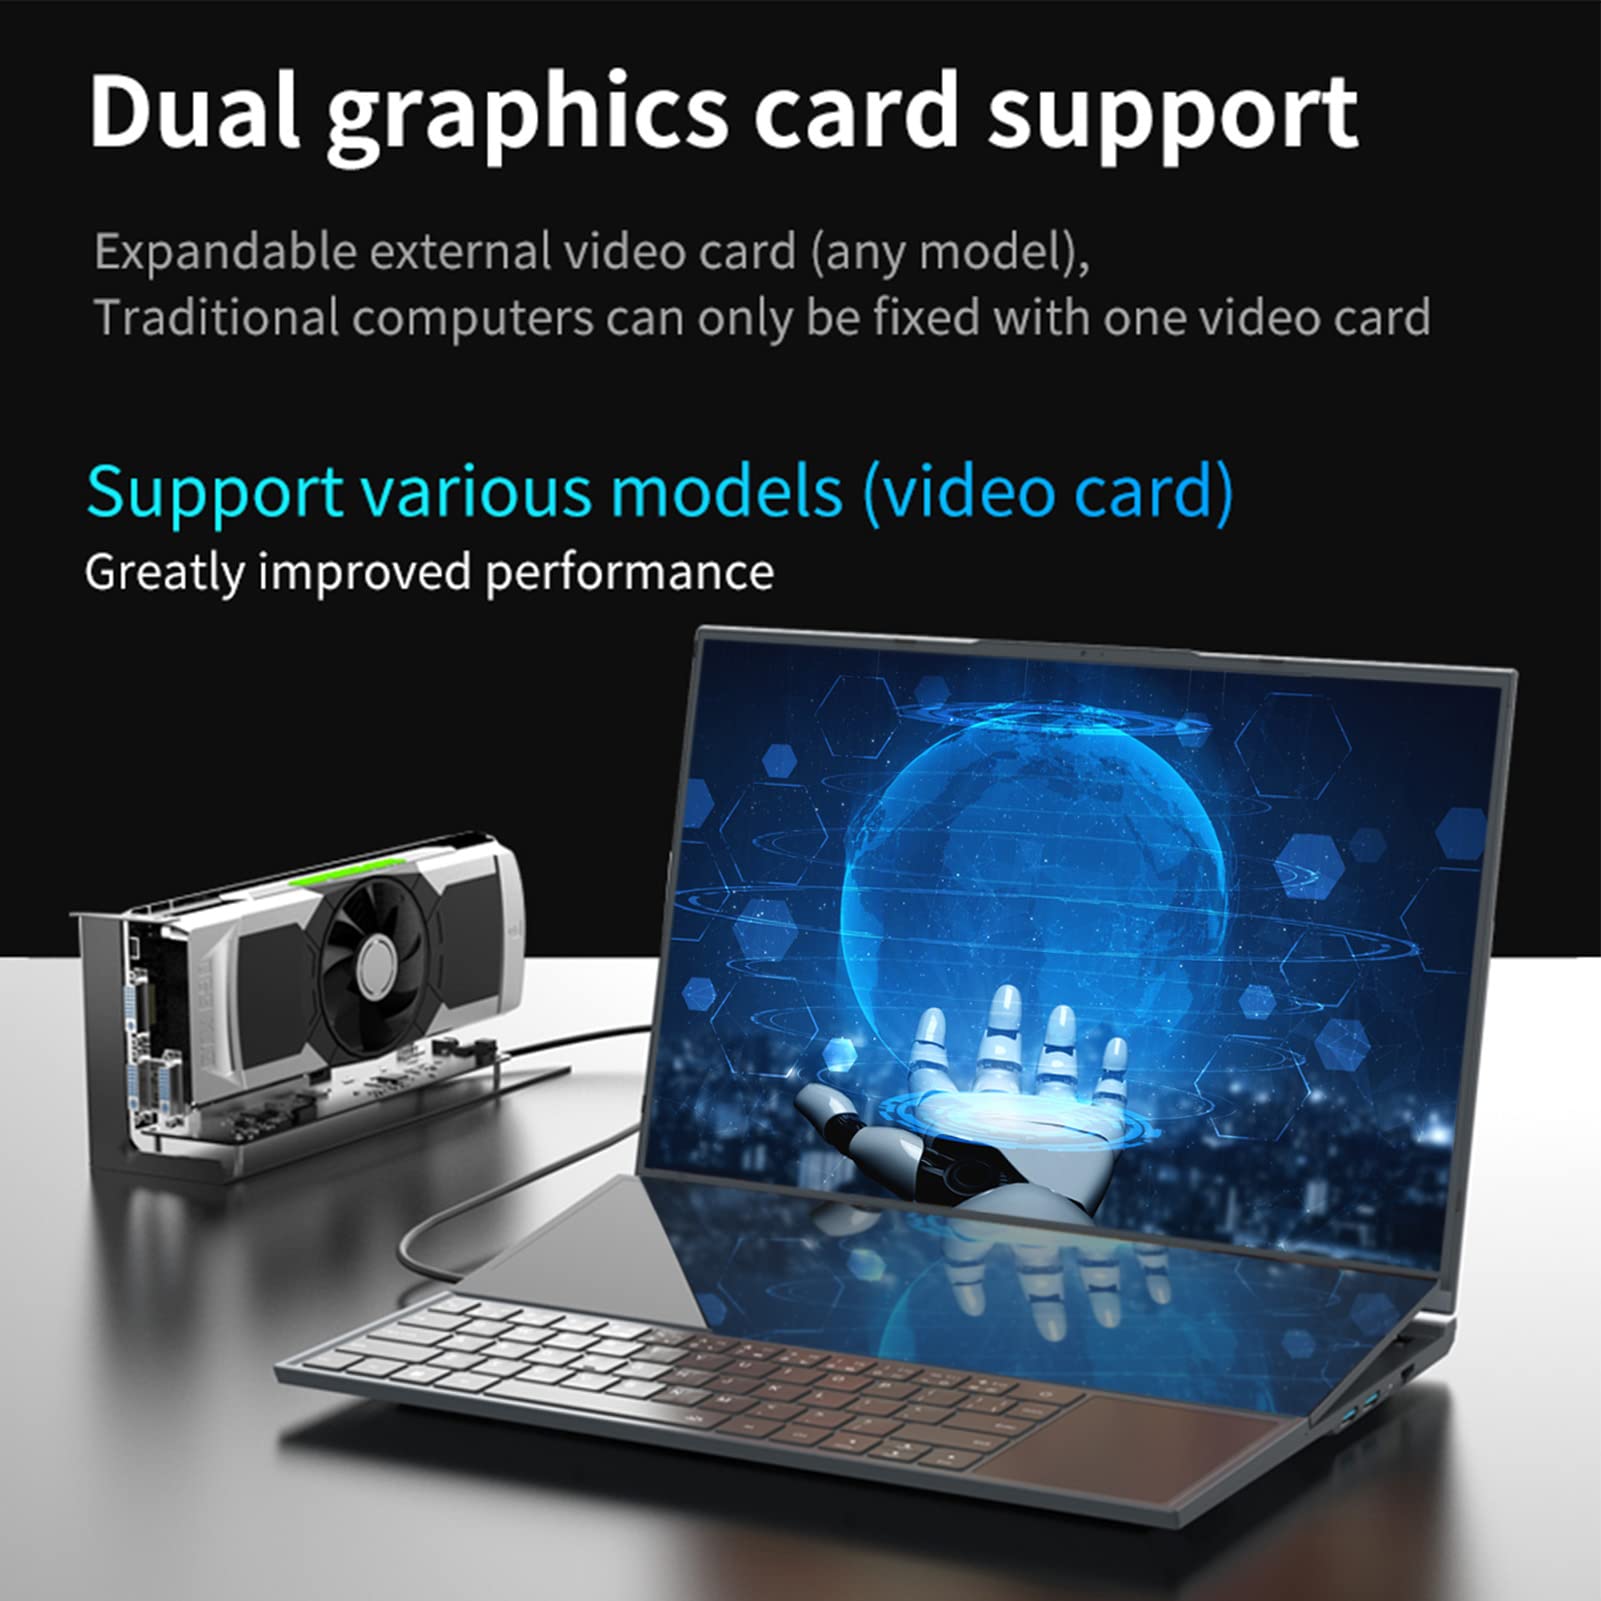 Tangxi Smart Dual Screen Laptop,16in Main Screen & 14in Touch Screen,for Intel Core I7 CPU,32G DDR4 RAM 64G SSD,Support Dual Graphics Cards,Dual Channel Memory.